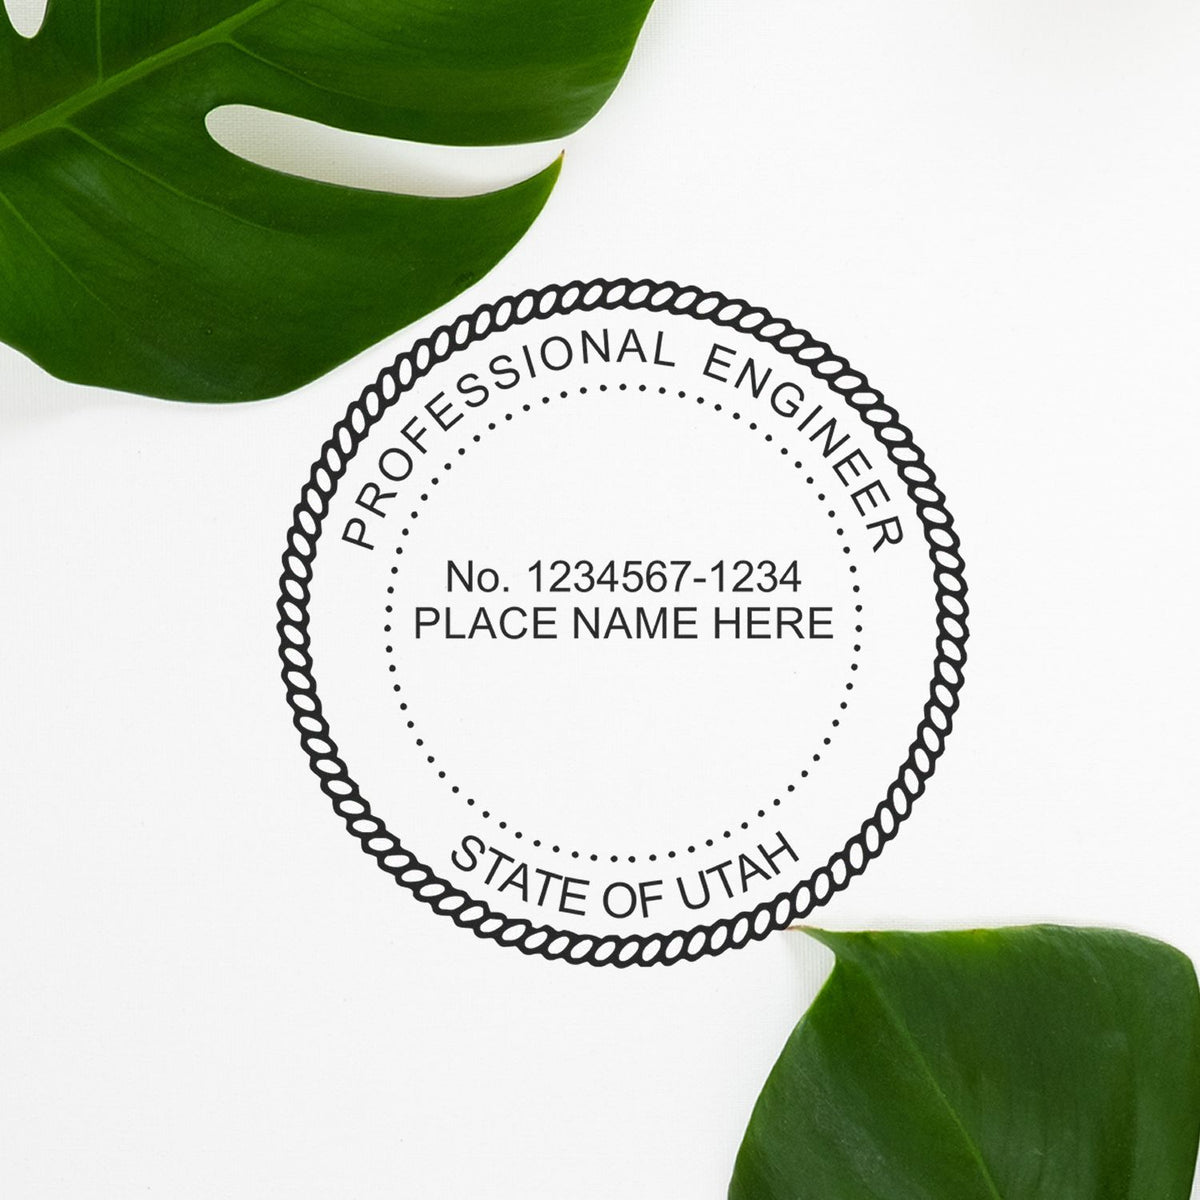 This paper is stamped with a sample imprint of the Utah Professional Engineer Seal Stamp, signifying its quality and reliability.